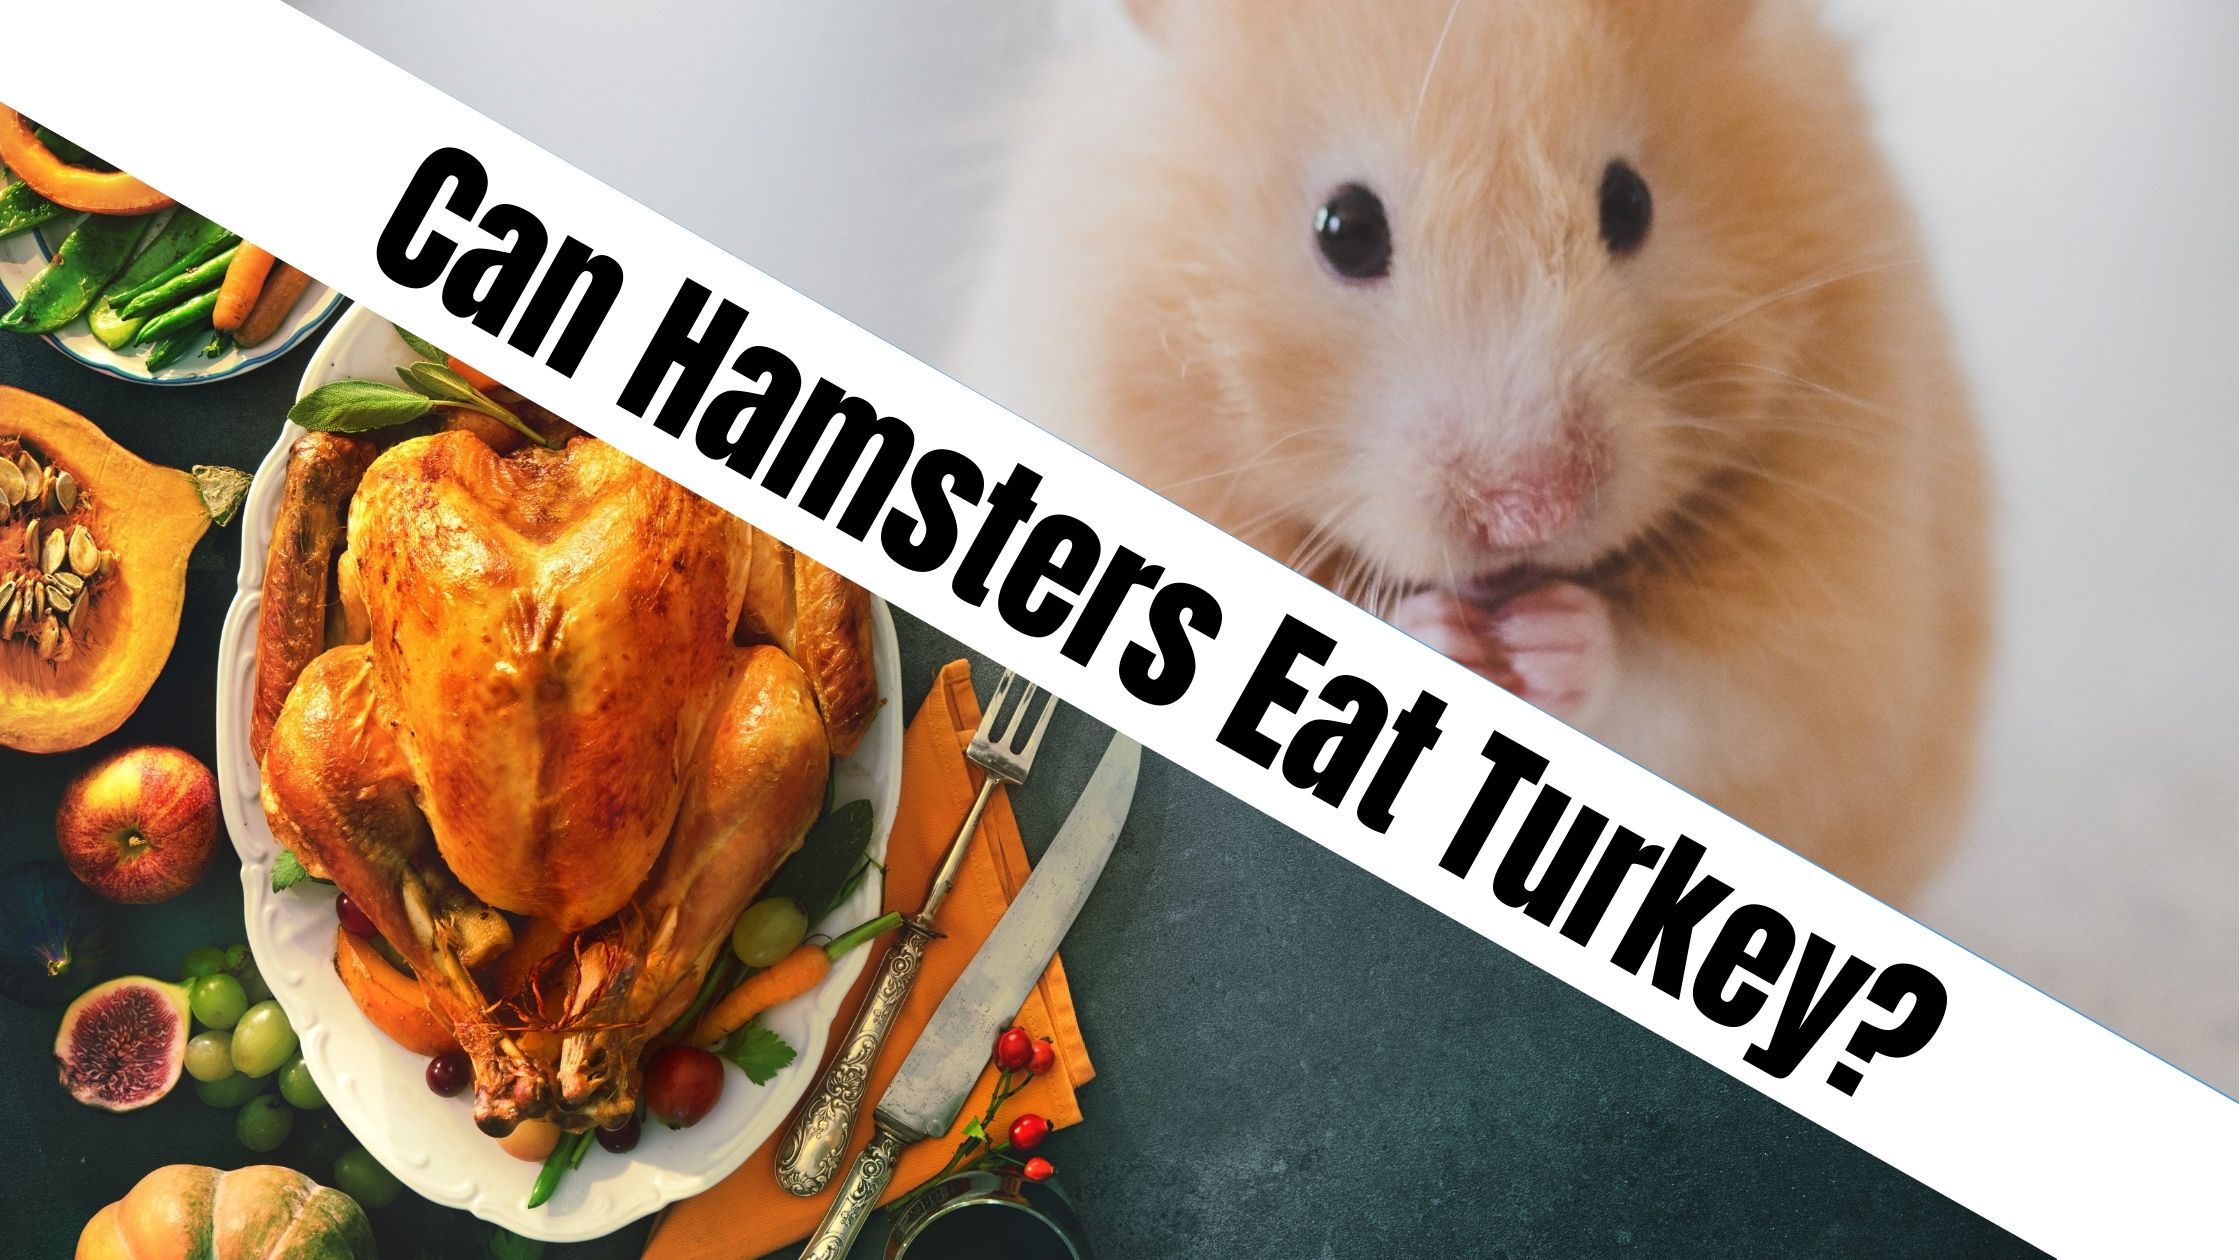 Can Hamsters Eat Turkey?